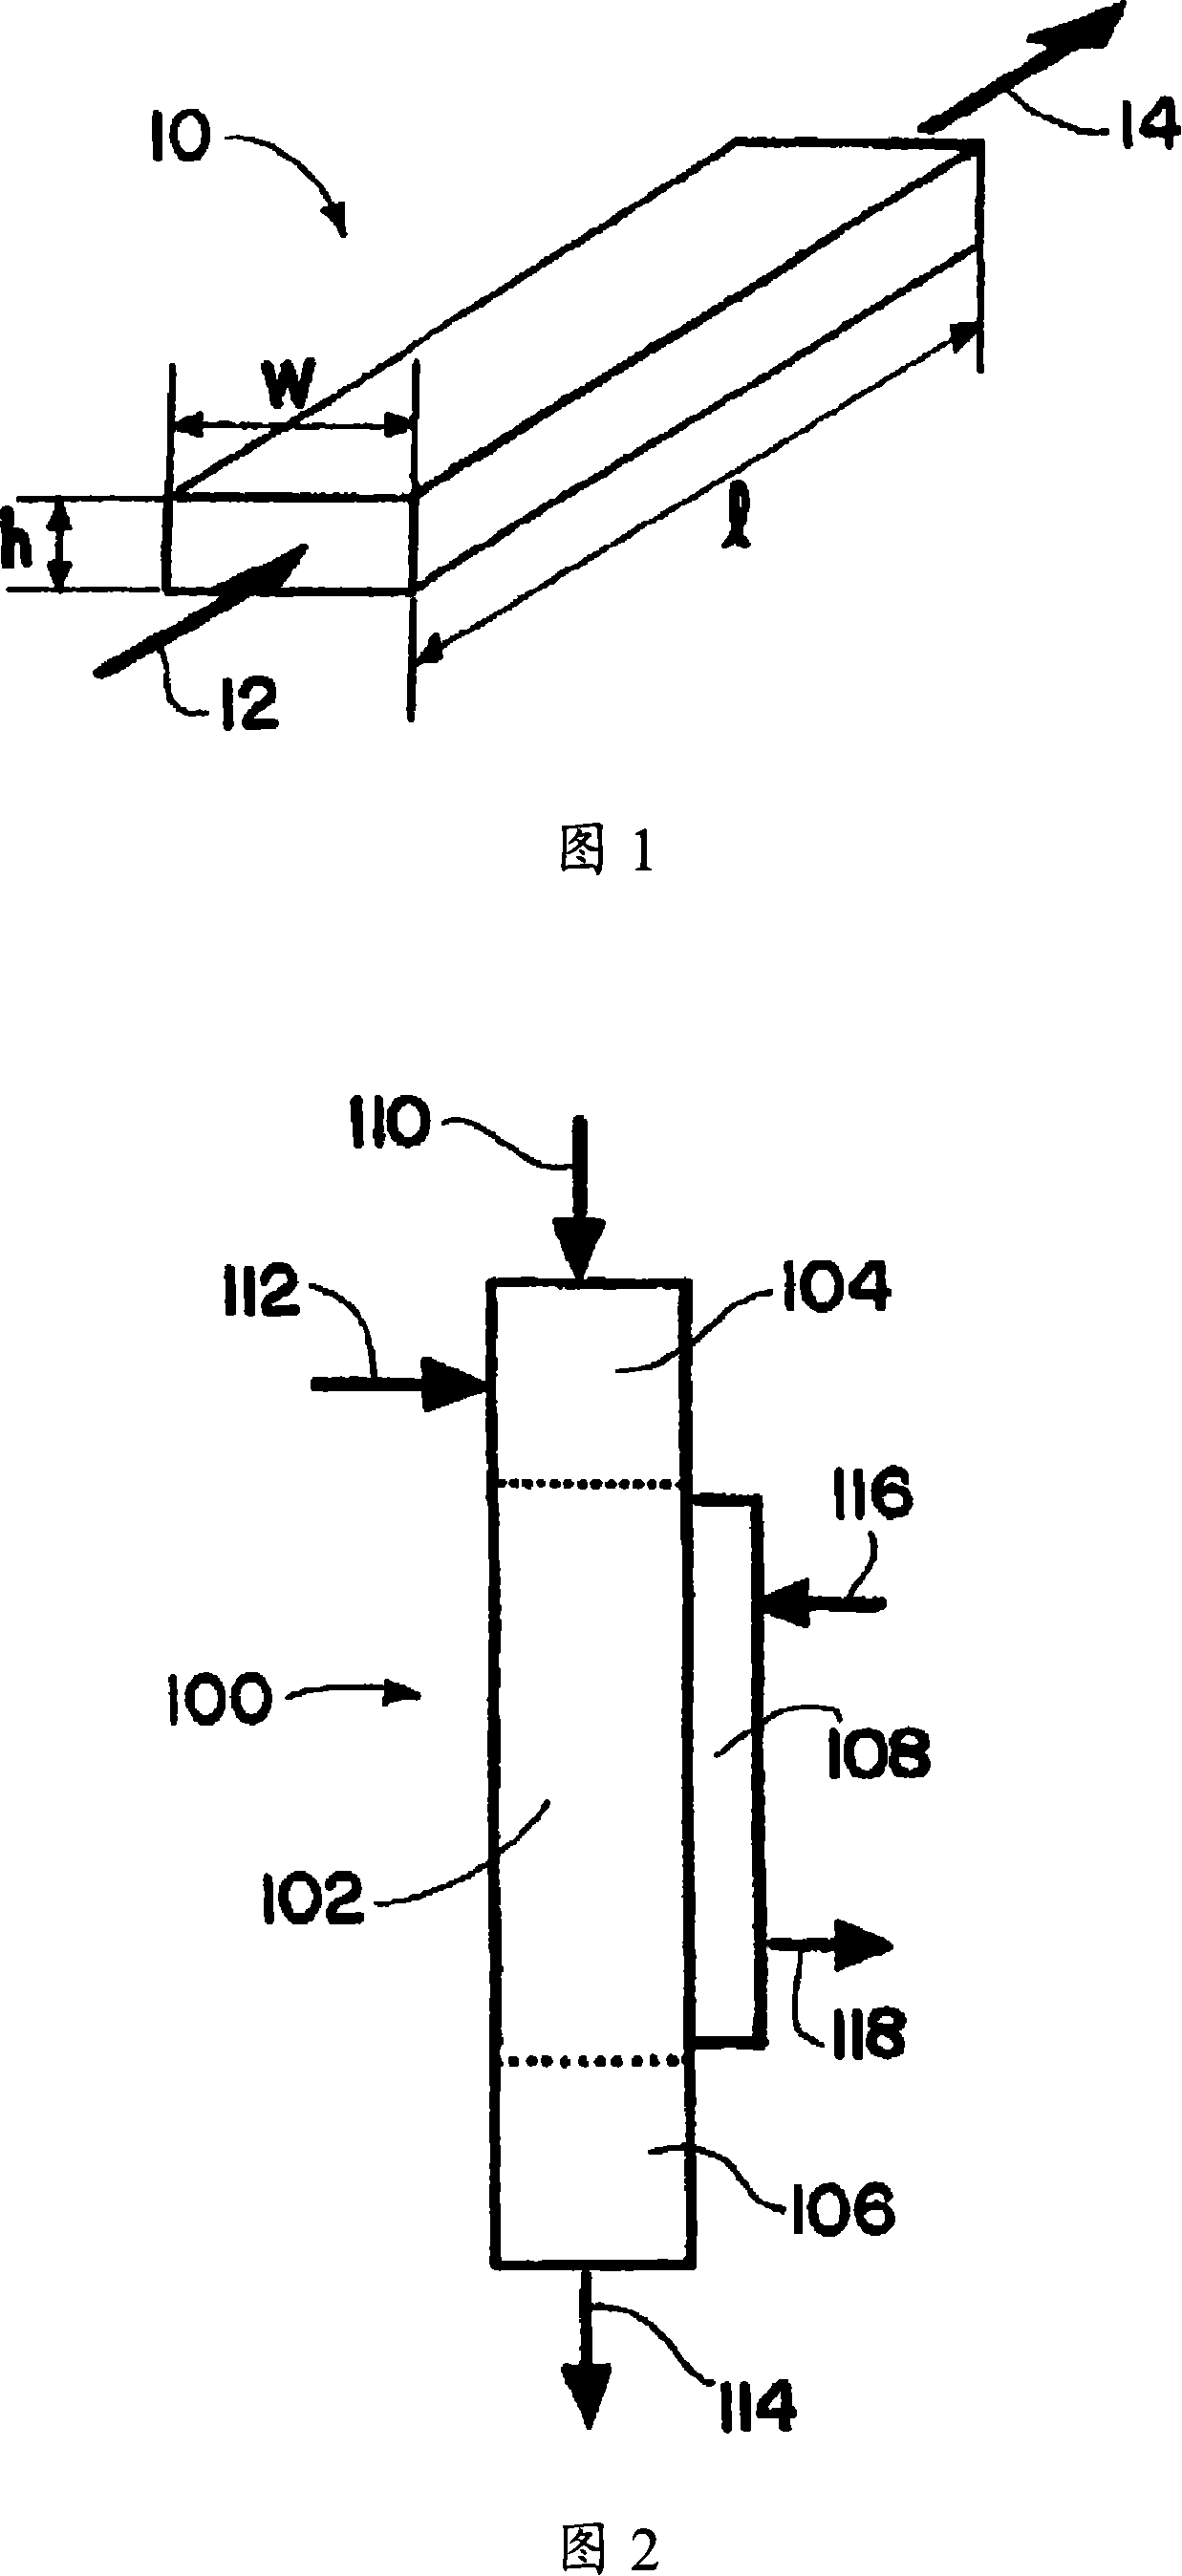 Multiphase reaction process using microchannel technology